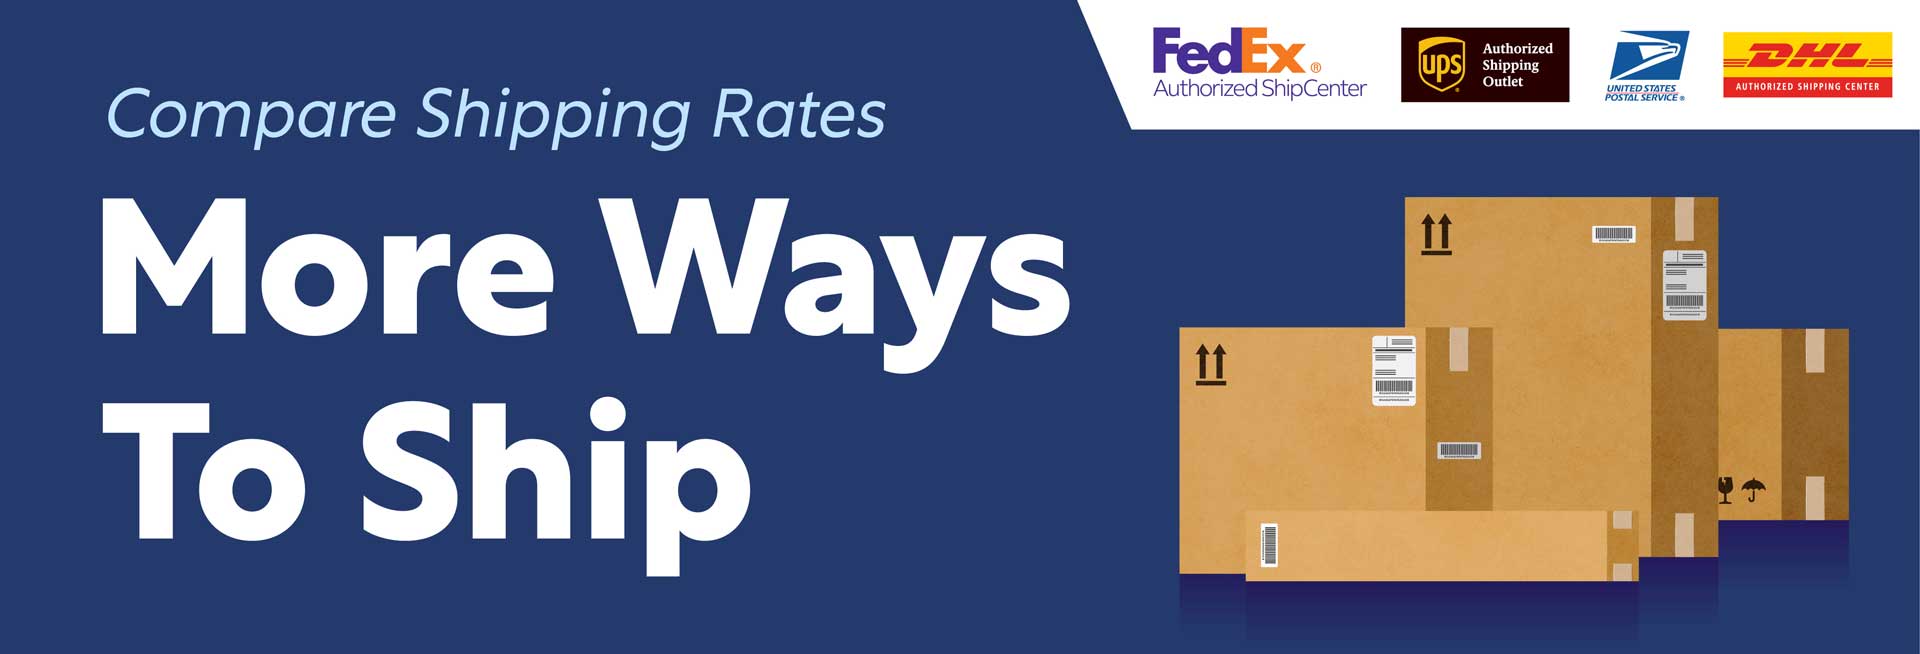 Compare Shipping Rates - More Ways to Ship